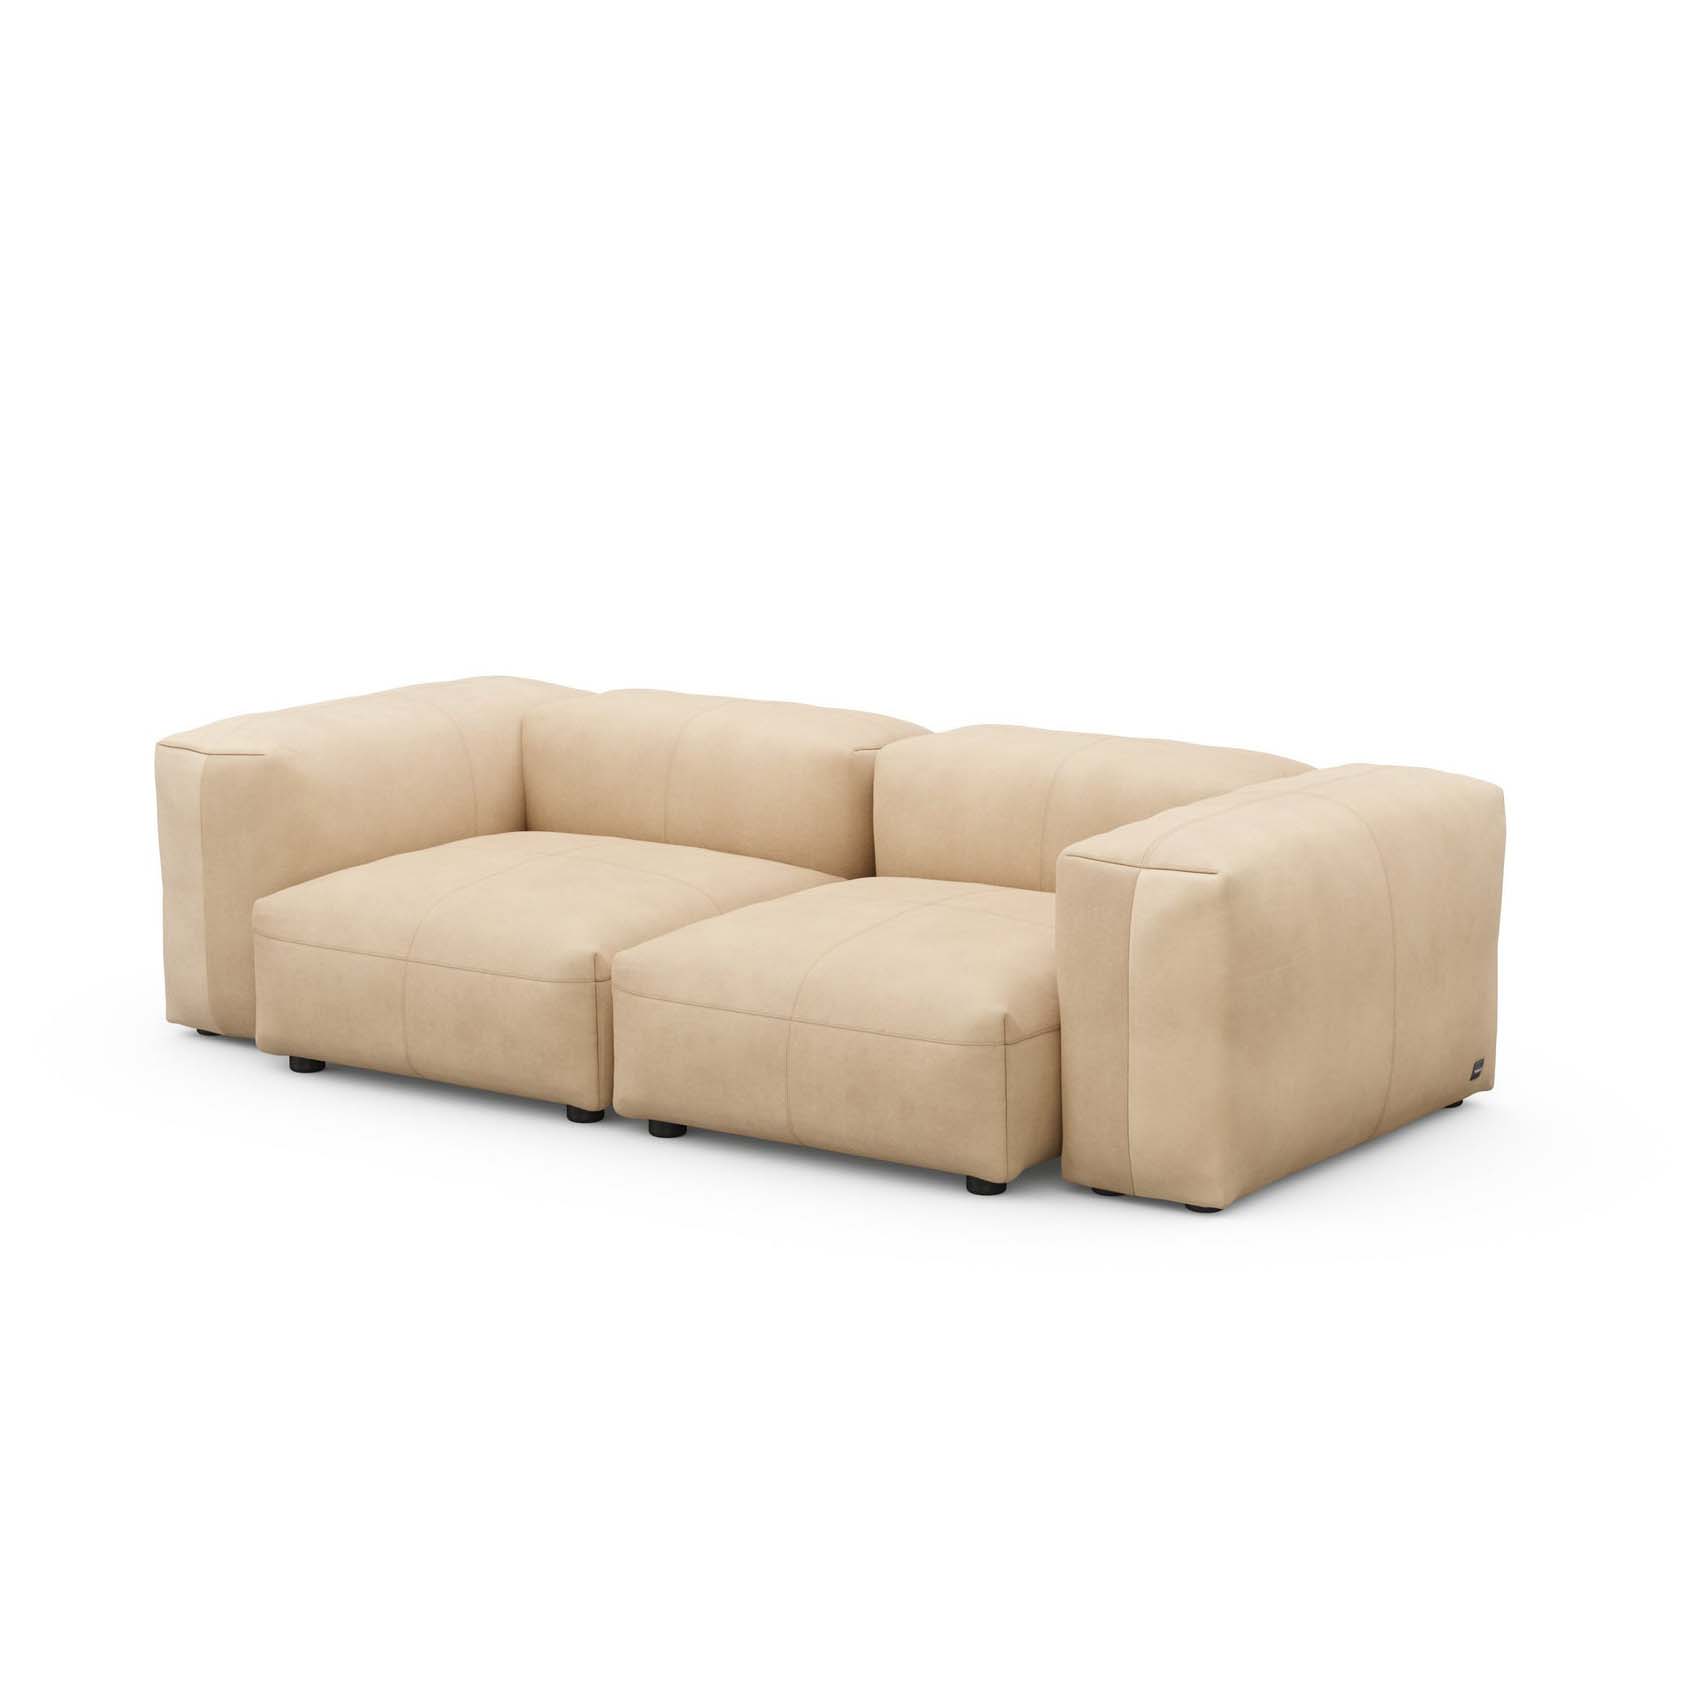 Two Seat Sofa S Leather Beige